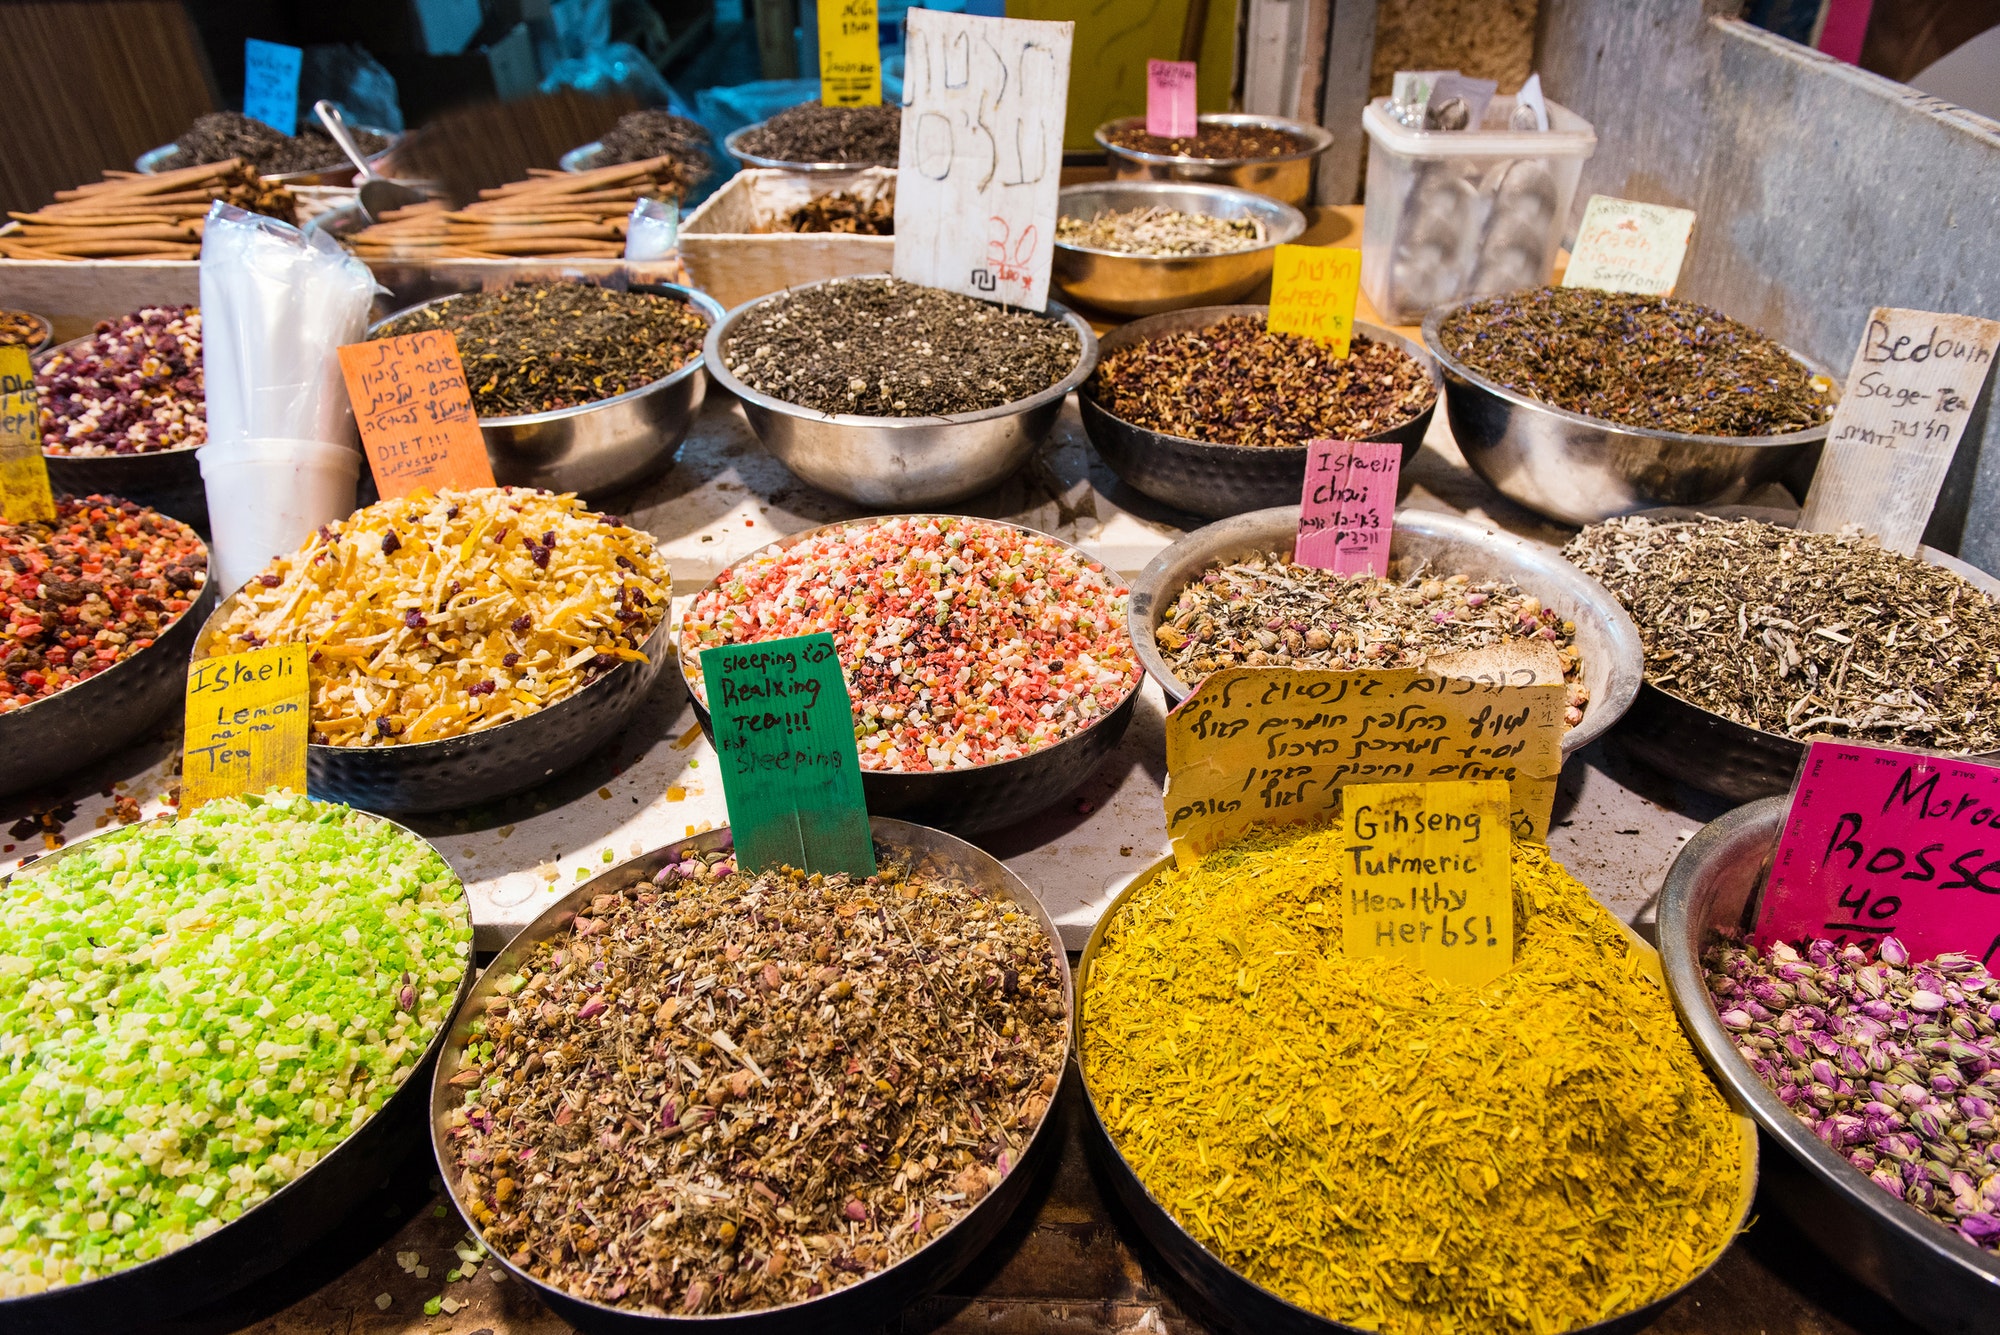 Baskets full with dried fruits, spices and herbs in Mahane Yehuda market. Jerusalem, Israel